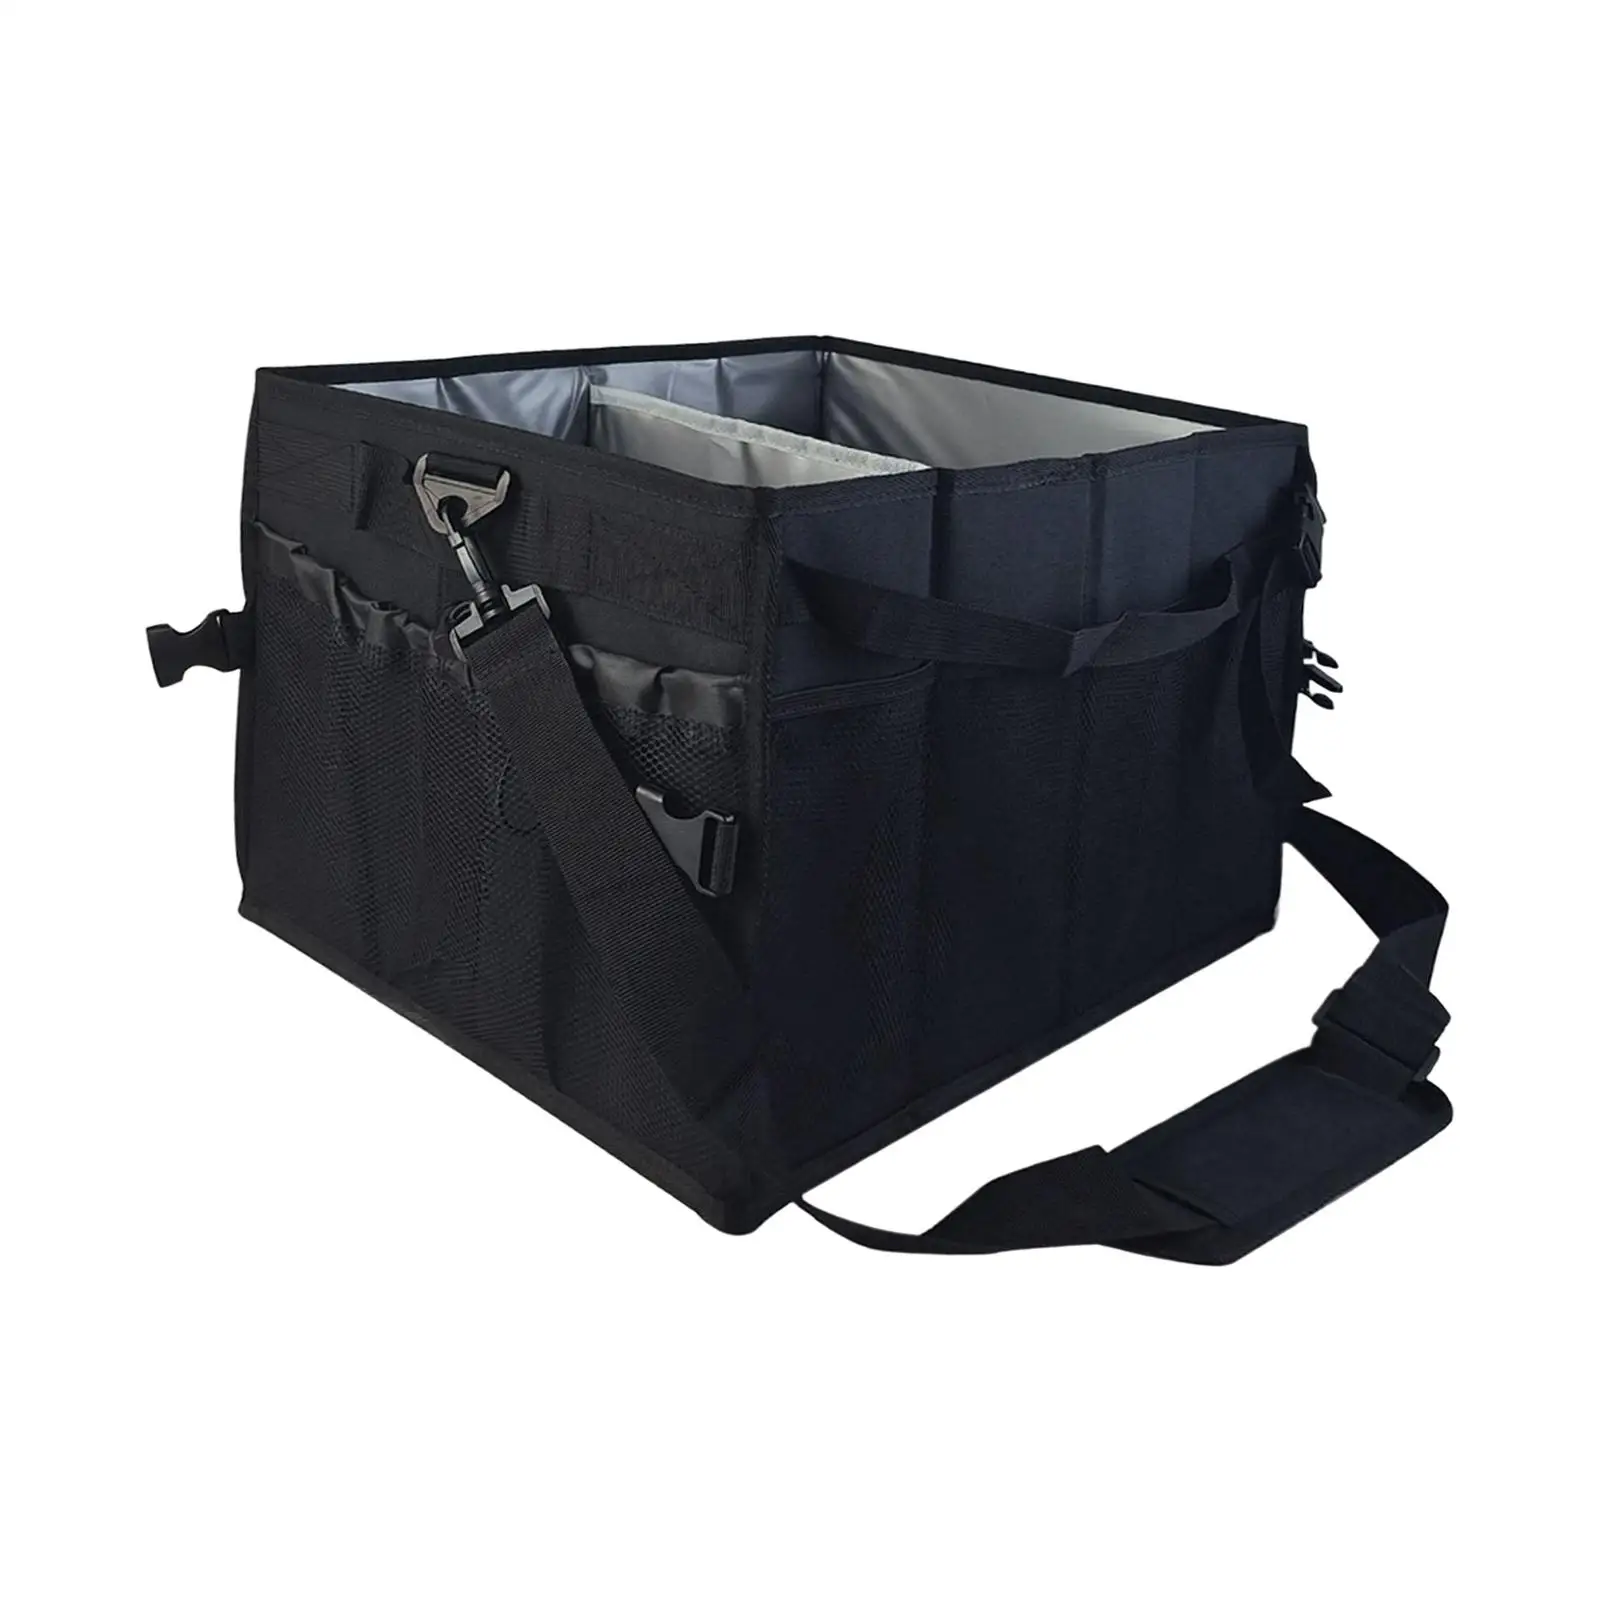 Portable BBQ Tool Storage Bag Outdoor Picnic Cooking Tools Bag Organizer Grill Tool Carrying Bag Waterproof for Trip Camping RV